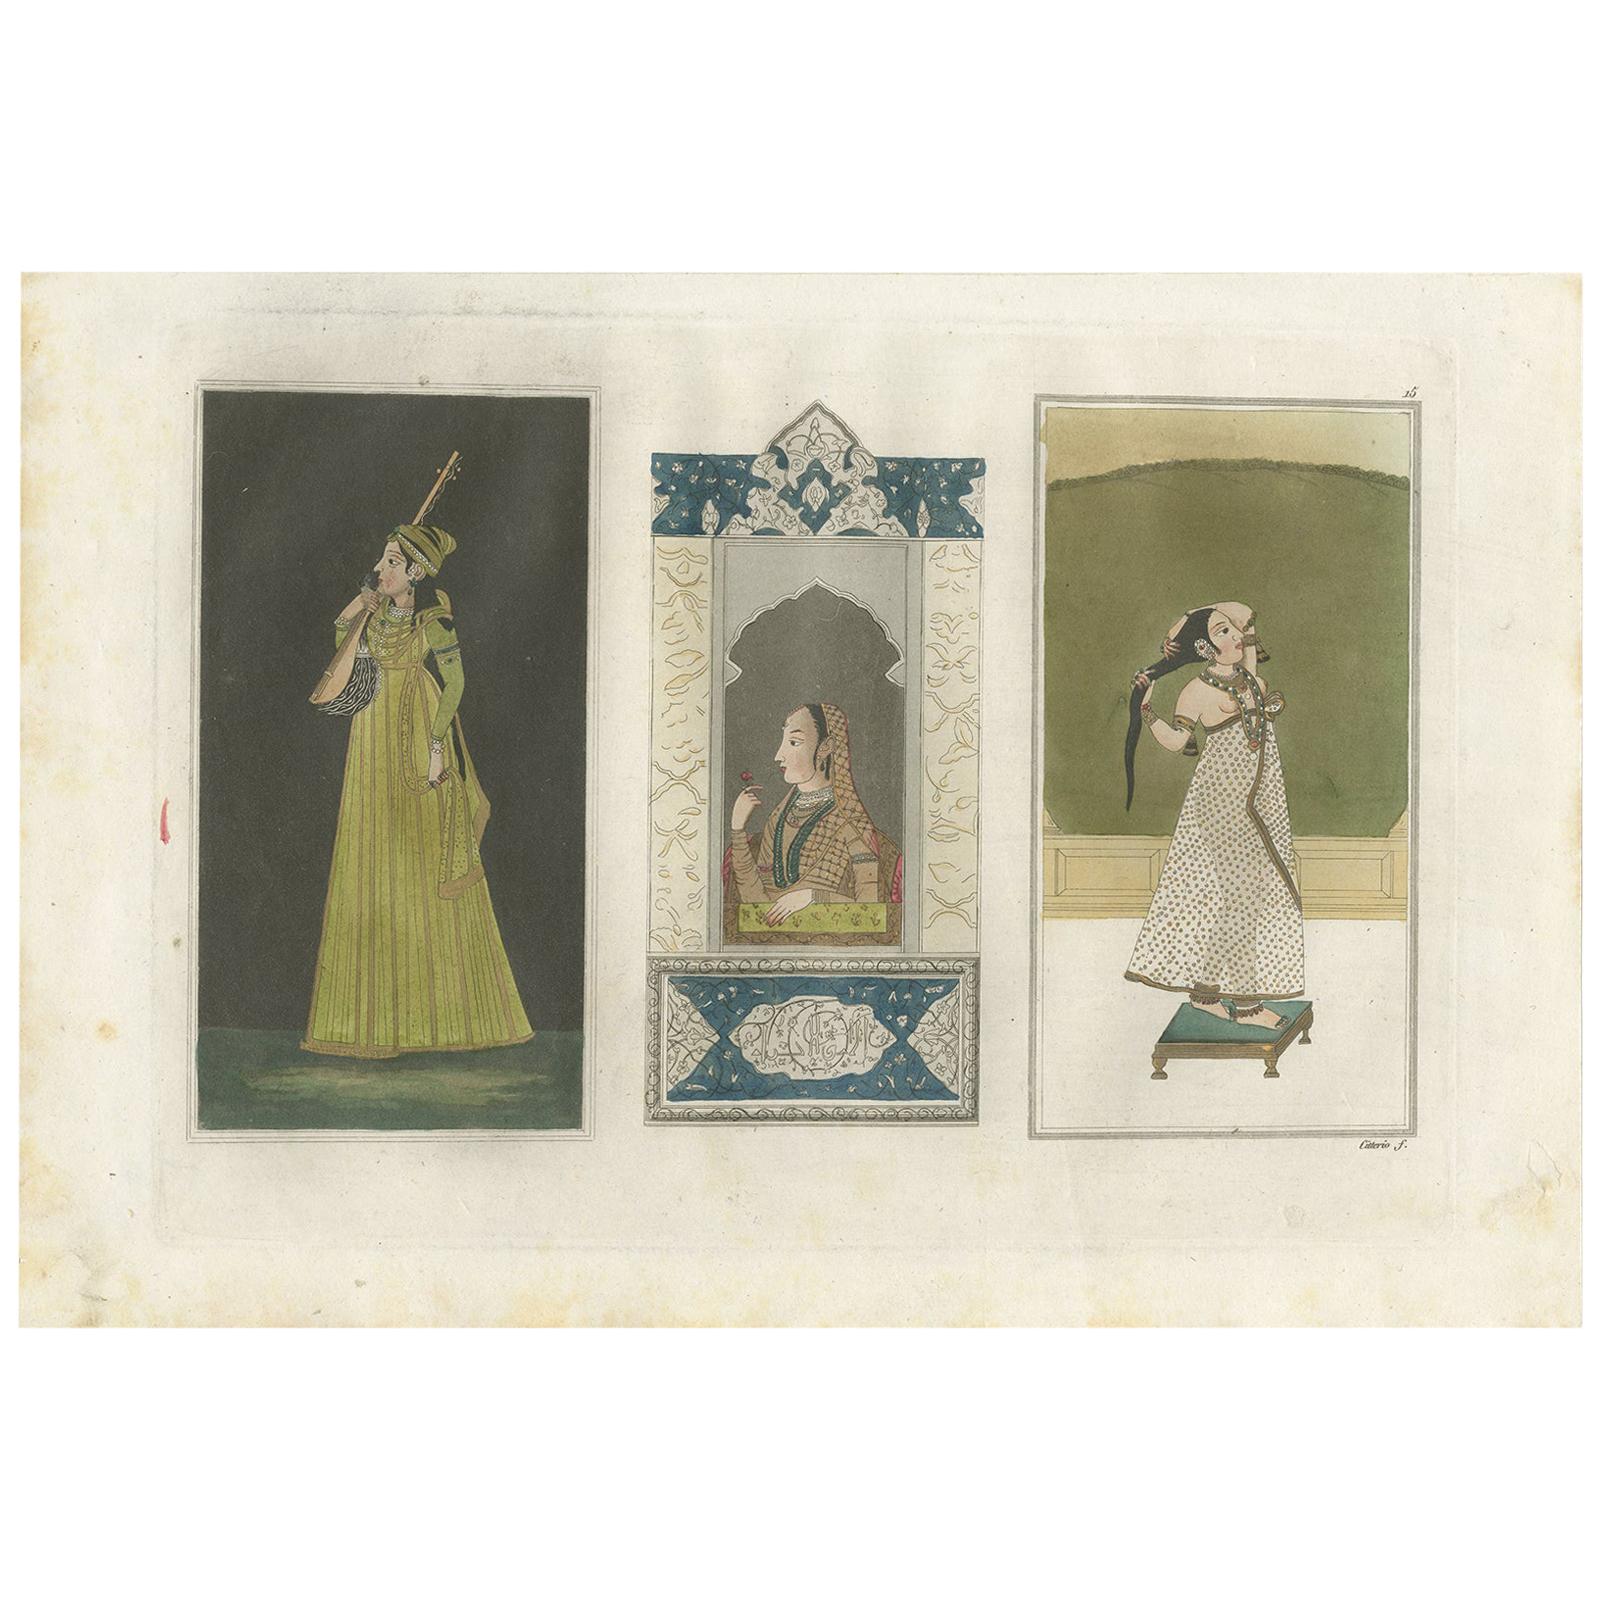 Antique Print of a Kannur Princess and Indian Ladies by Ferrario, '1831'